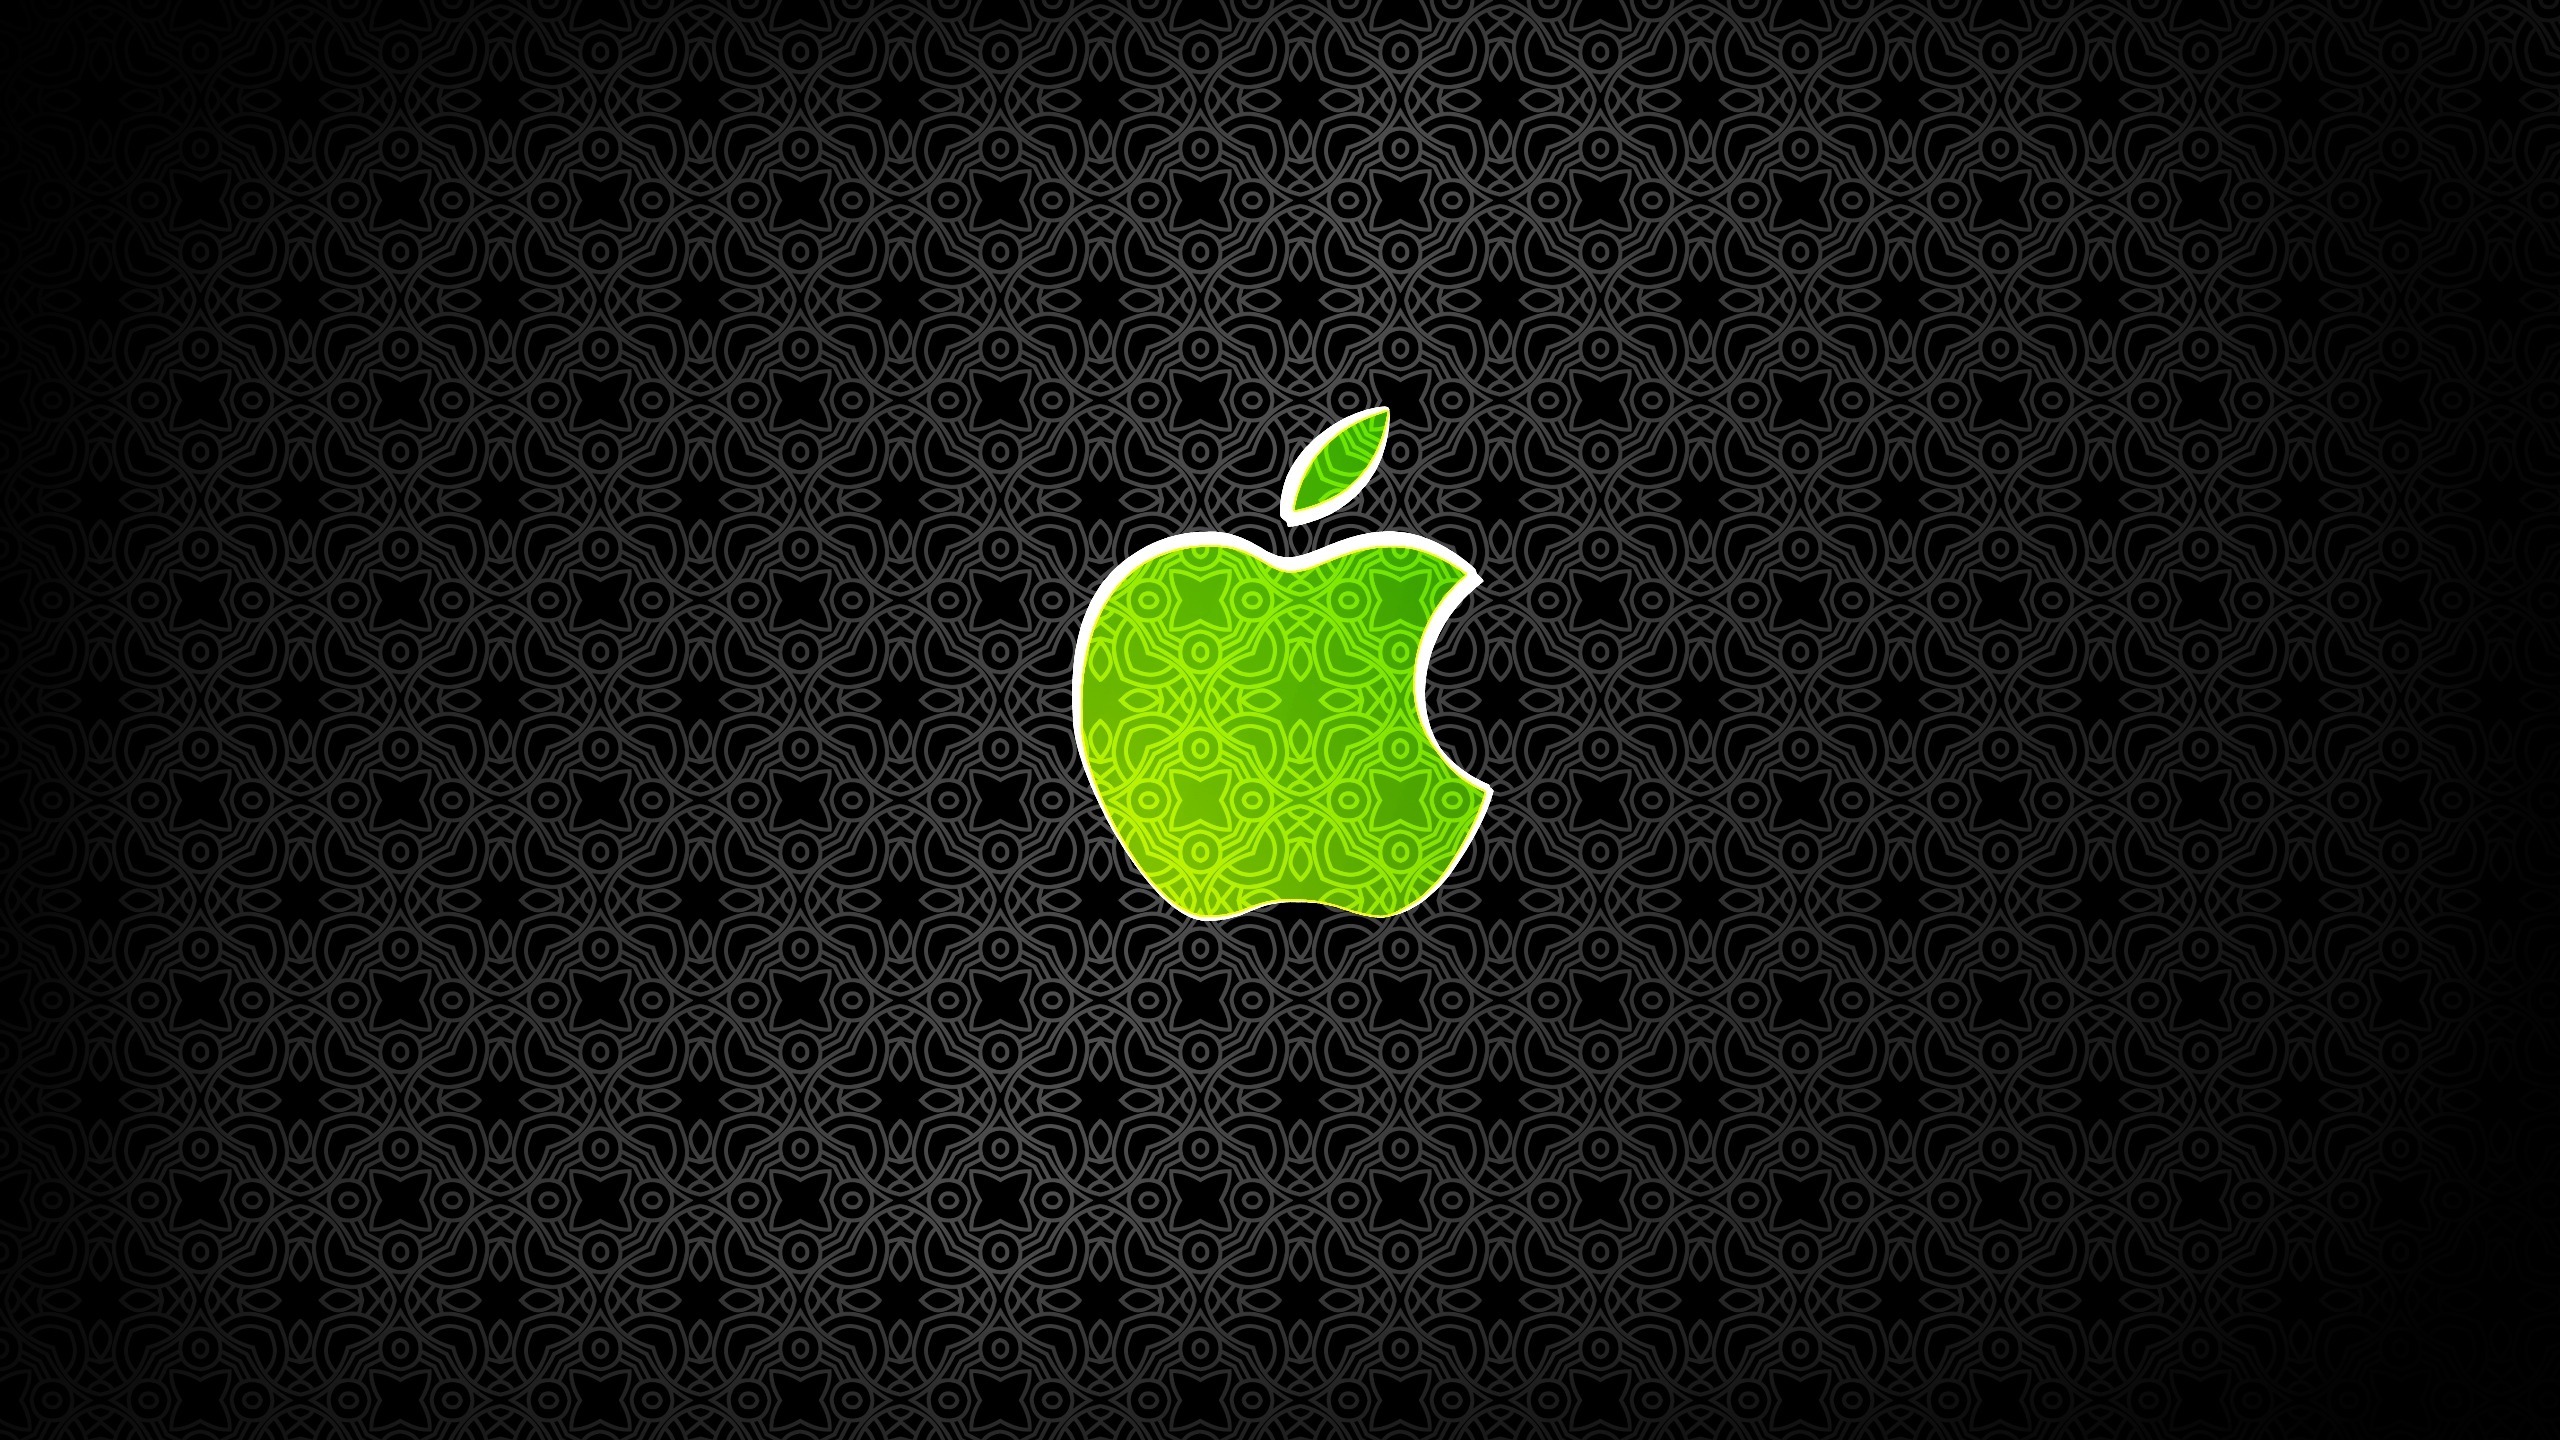 brands, logos, apple, background, black cell phone wallpapers